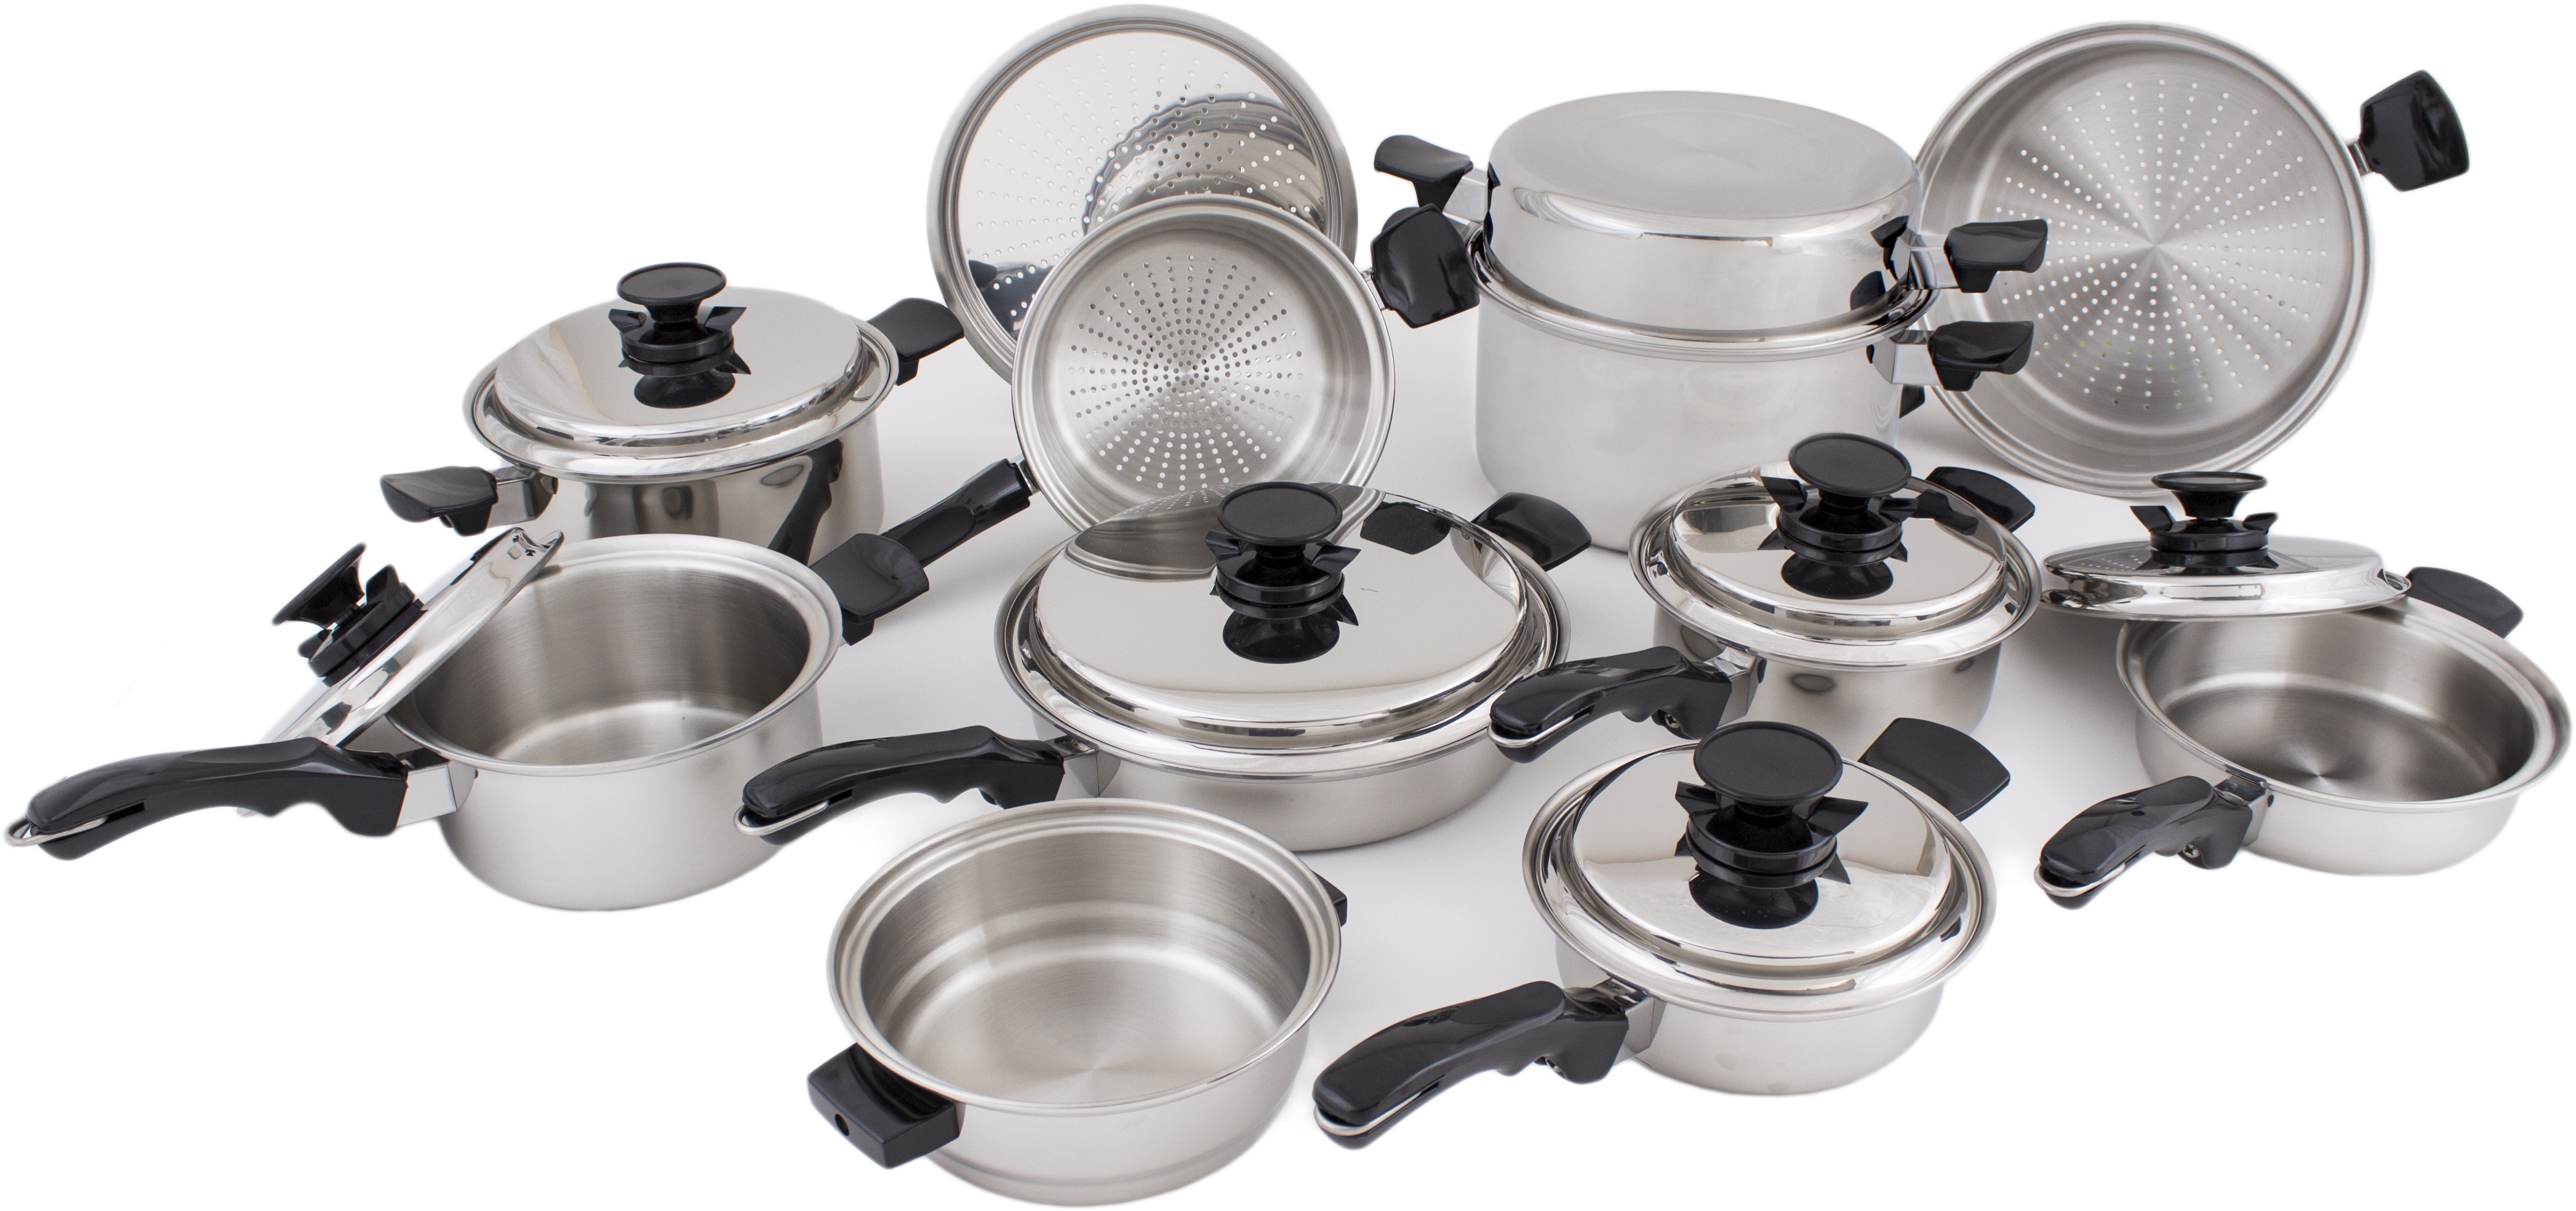 Discover More About Kitchen Craft Waterless Cookware For Sale thumbnail